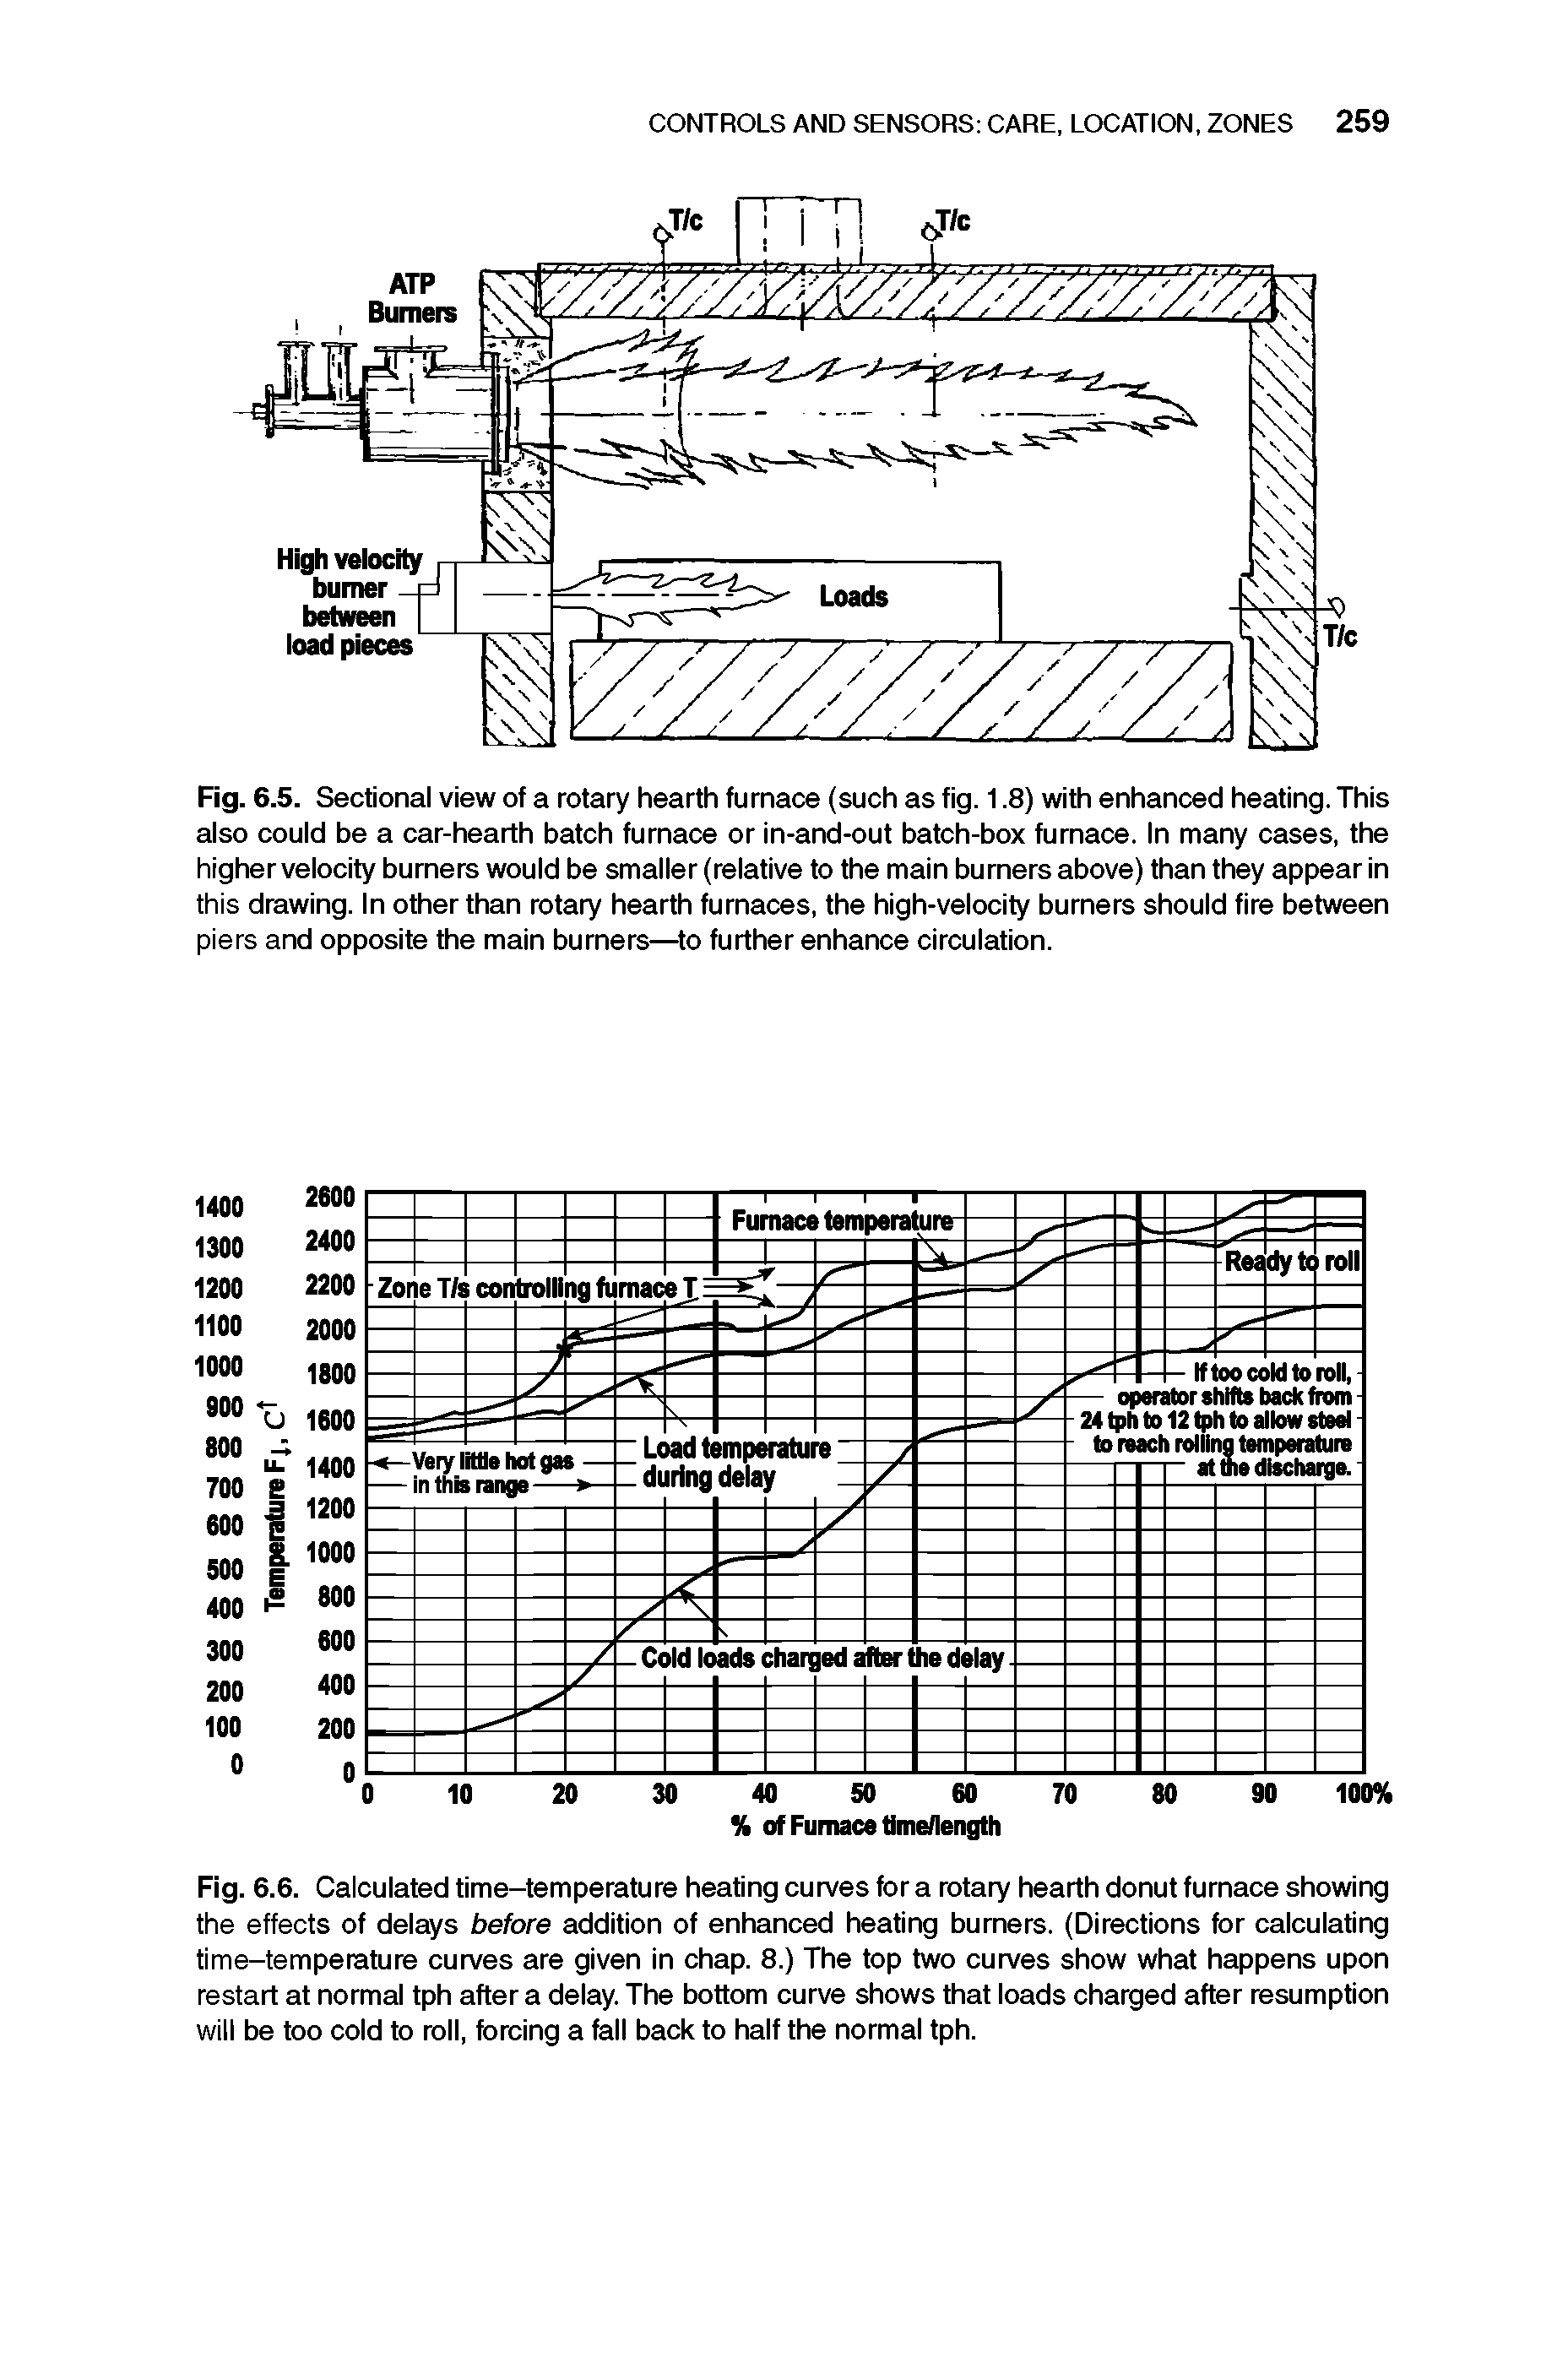 Fig. 6.6. Calculated time-temperature heating curves for a rotary hearth donut furnace showing the effects of delays before addition of enhanced heating burners. (Directions for calculating time-temperature curves are given in chap. 8.) The top two curves show what happens upon restart at normal tph after a delay. The bottom curve shows that loads charged after resumption will be too cold to roll, forcing a fall back to half the normal tph.